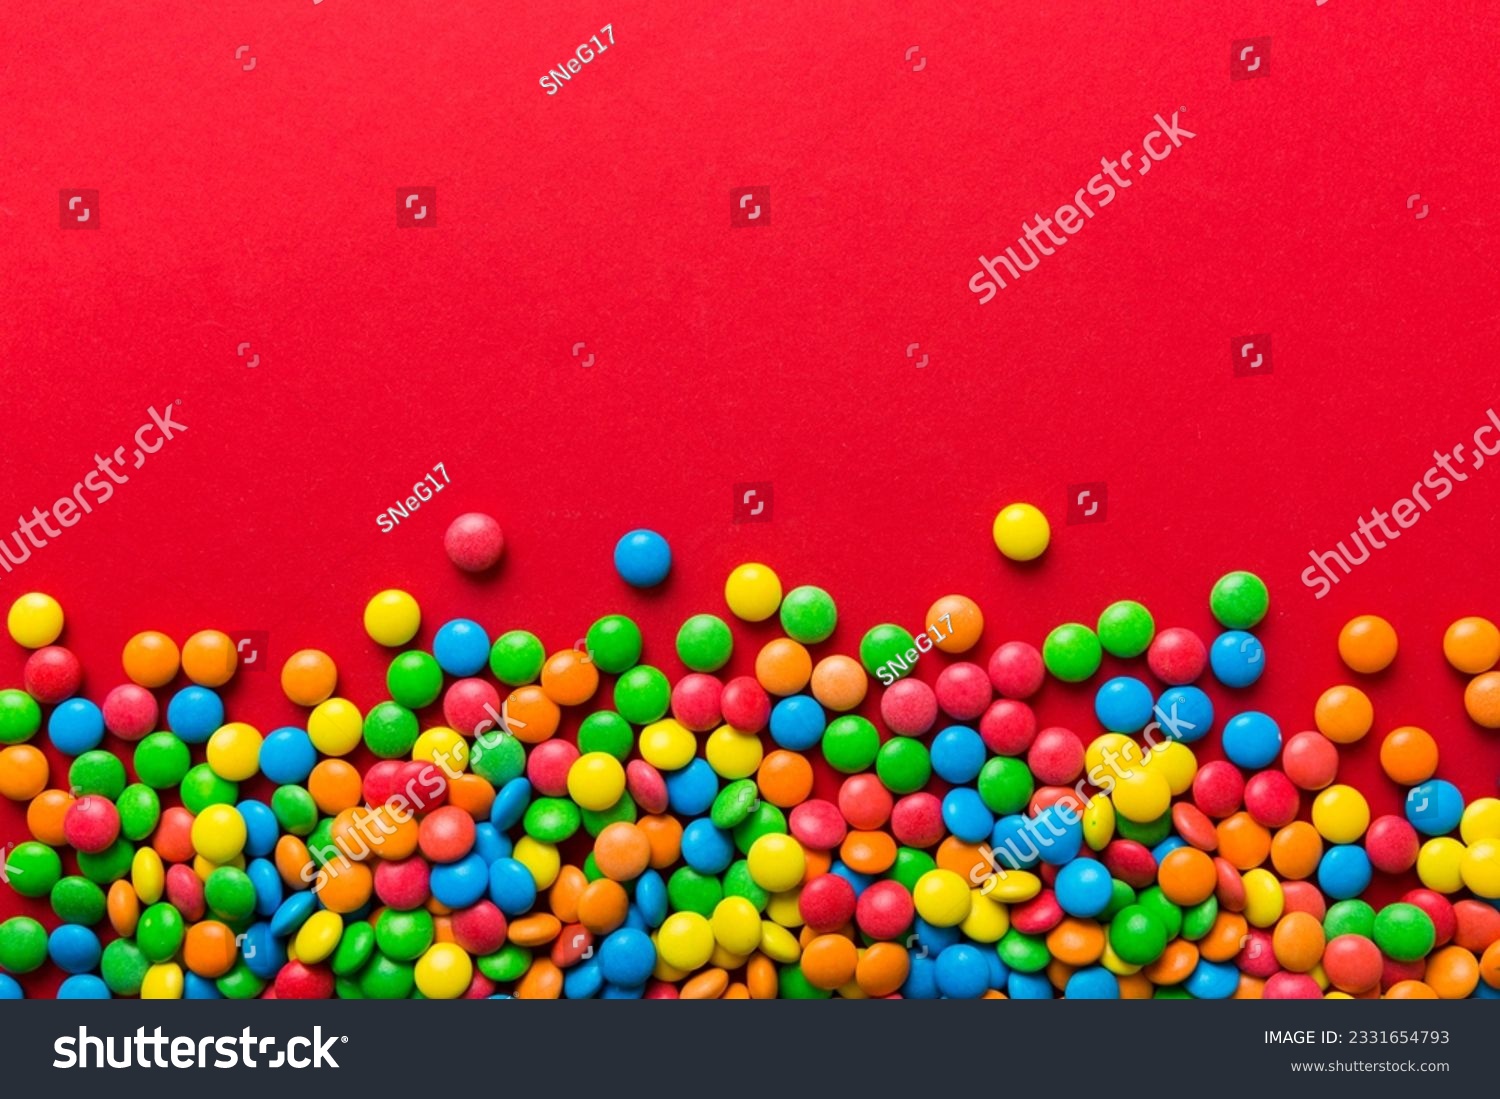 Mixed collection of colorful candy, on colored background. Flat lay, top view. frame of colorful chocolate coated candy. #2331654793